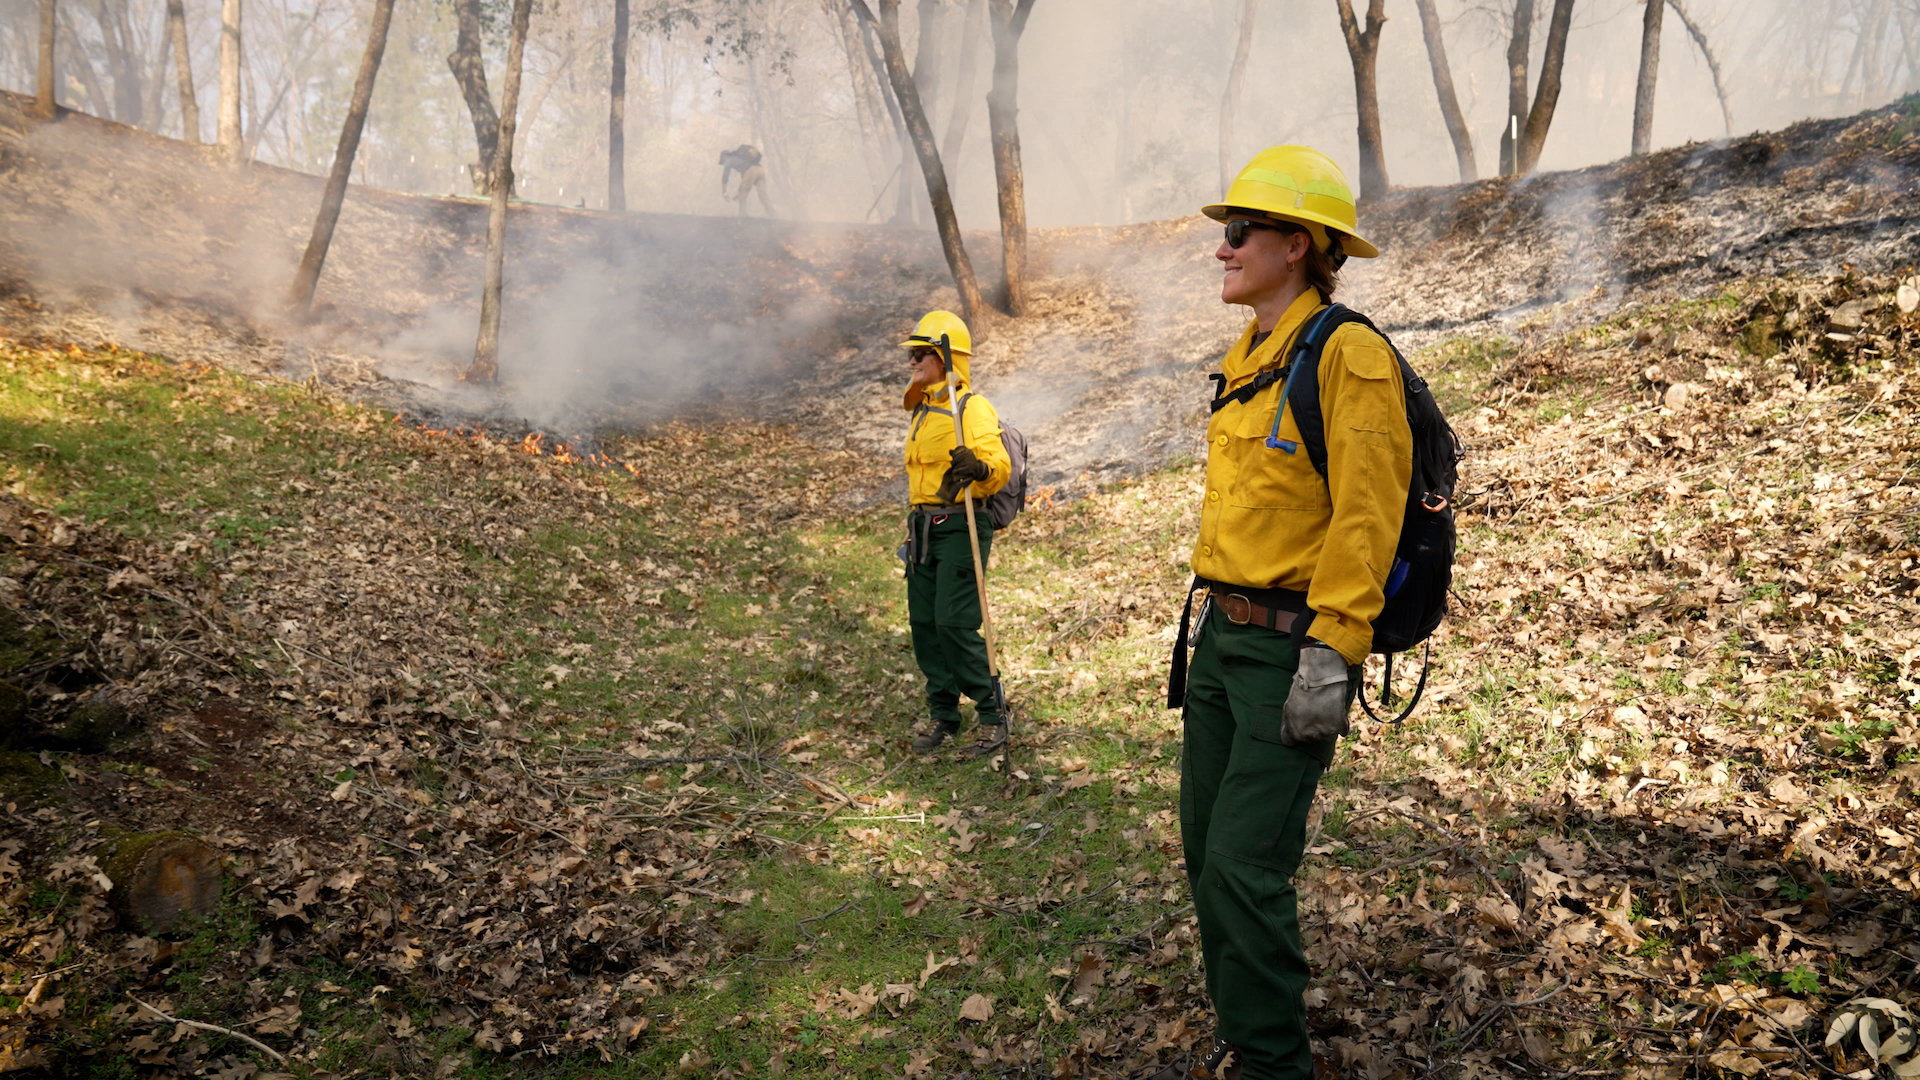 From left, Yoshi Maezumi and Rebecca Wayman of UC Davis stand in Ted Odell's woods during a prescribed burn on the property. (TIm McConville/UC Davis)